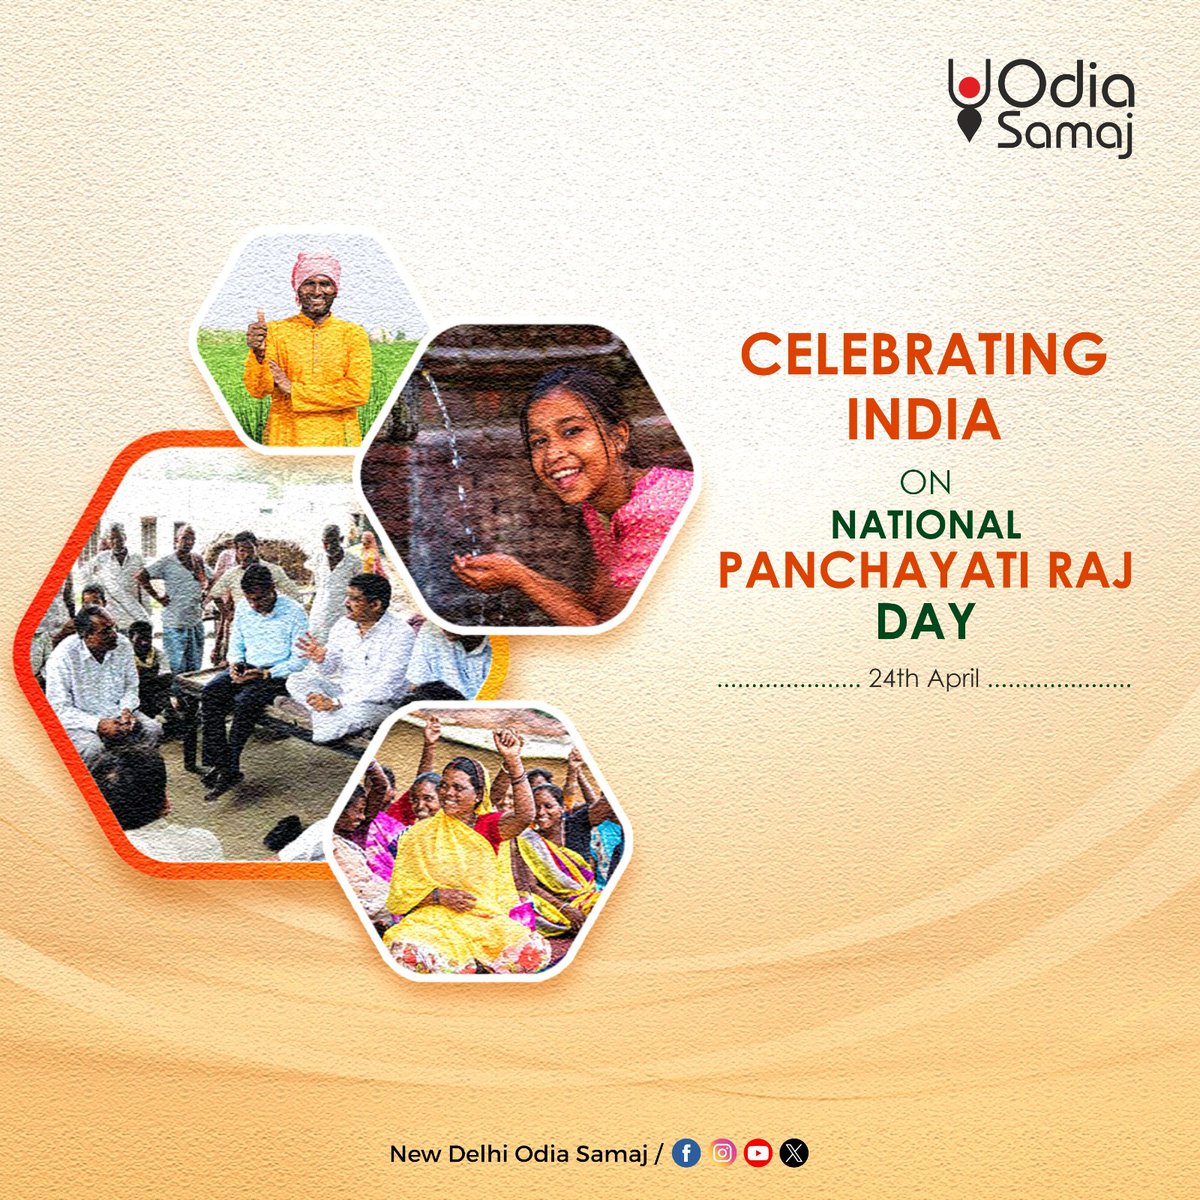 Empowering Villages, Transforming India!
Let's continue empowering every voice in our nation's progress.

Happy #NationalPanchayatiRajDay!

#PanchayatiRajDay #PanchayatiRajDay2024 #ruraldevelopment #communityleadership #localgovernance #grassrootsdemocracy #Odisha #OdiaSamaj